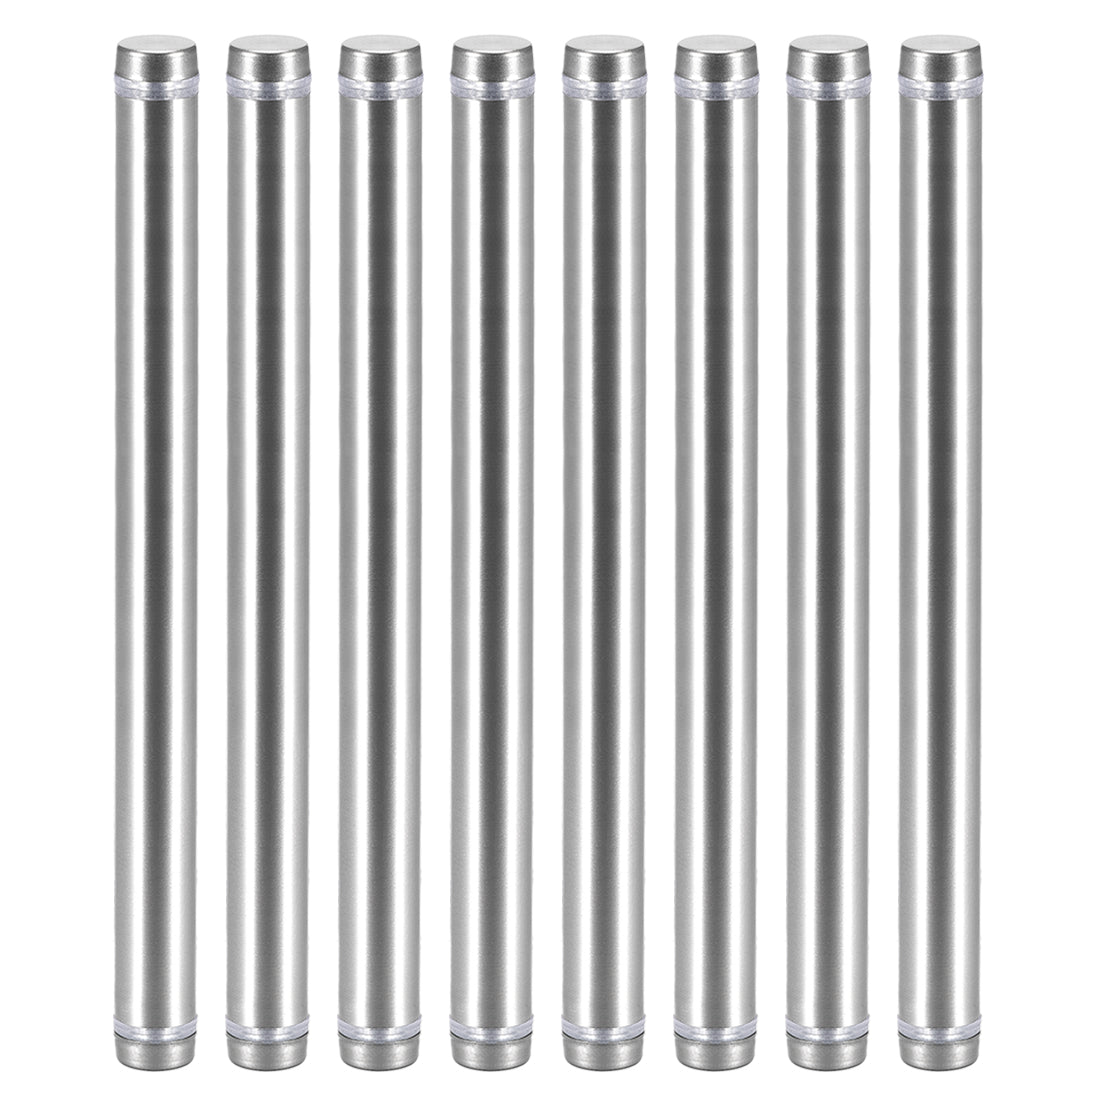 uxcell Uxcell Glass Standoff Double Head Stainless Steel Standoff Holder 12mm x 154mm 8 Pcs